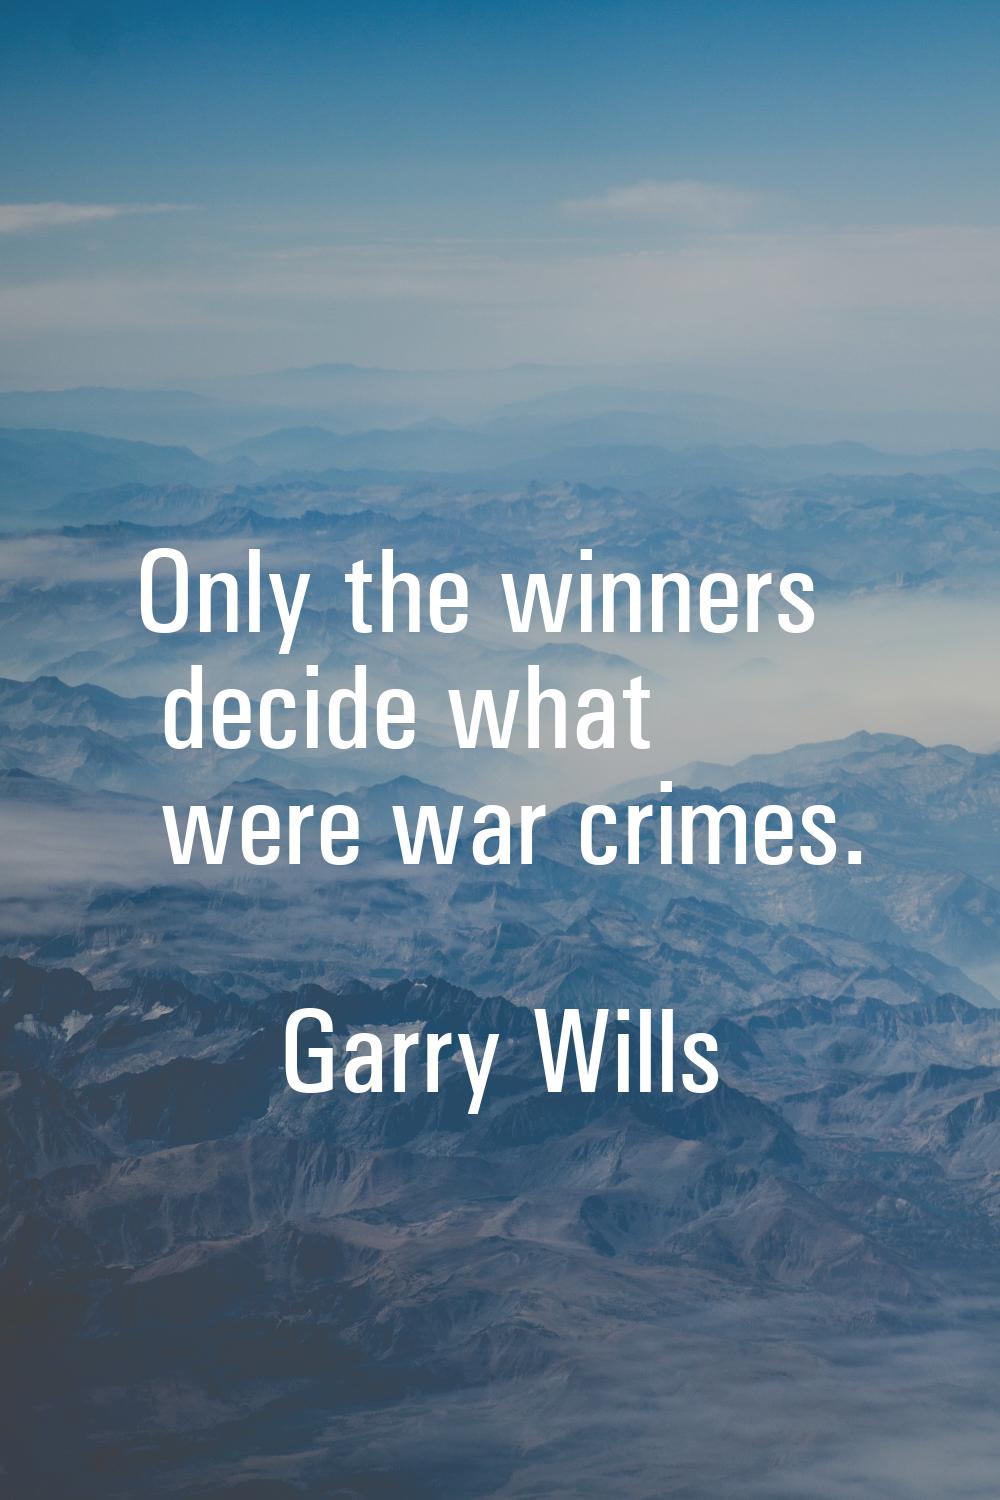 Only the winners decide what were war crimes.